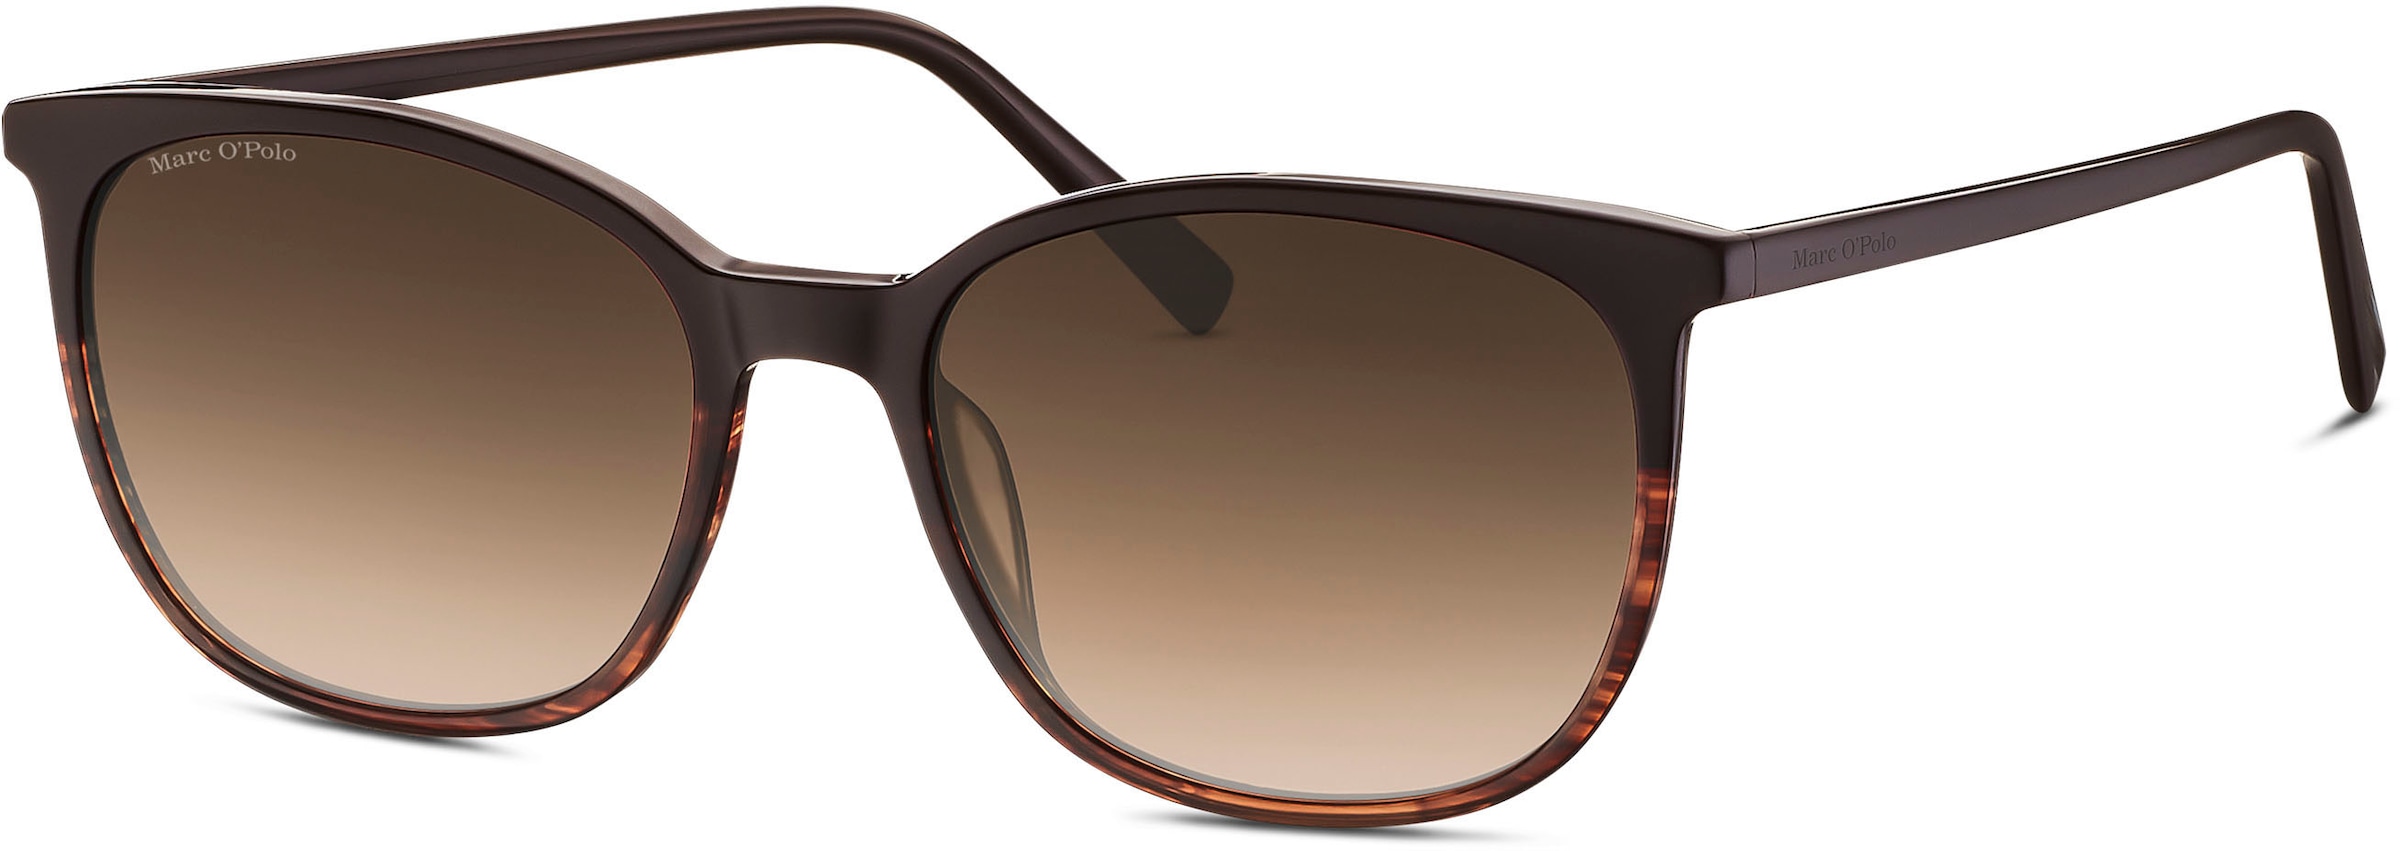 Marc OPolo Sonnenbrille "Modell 506188"